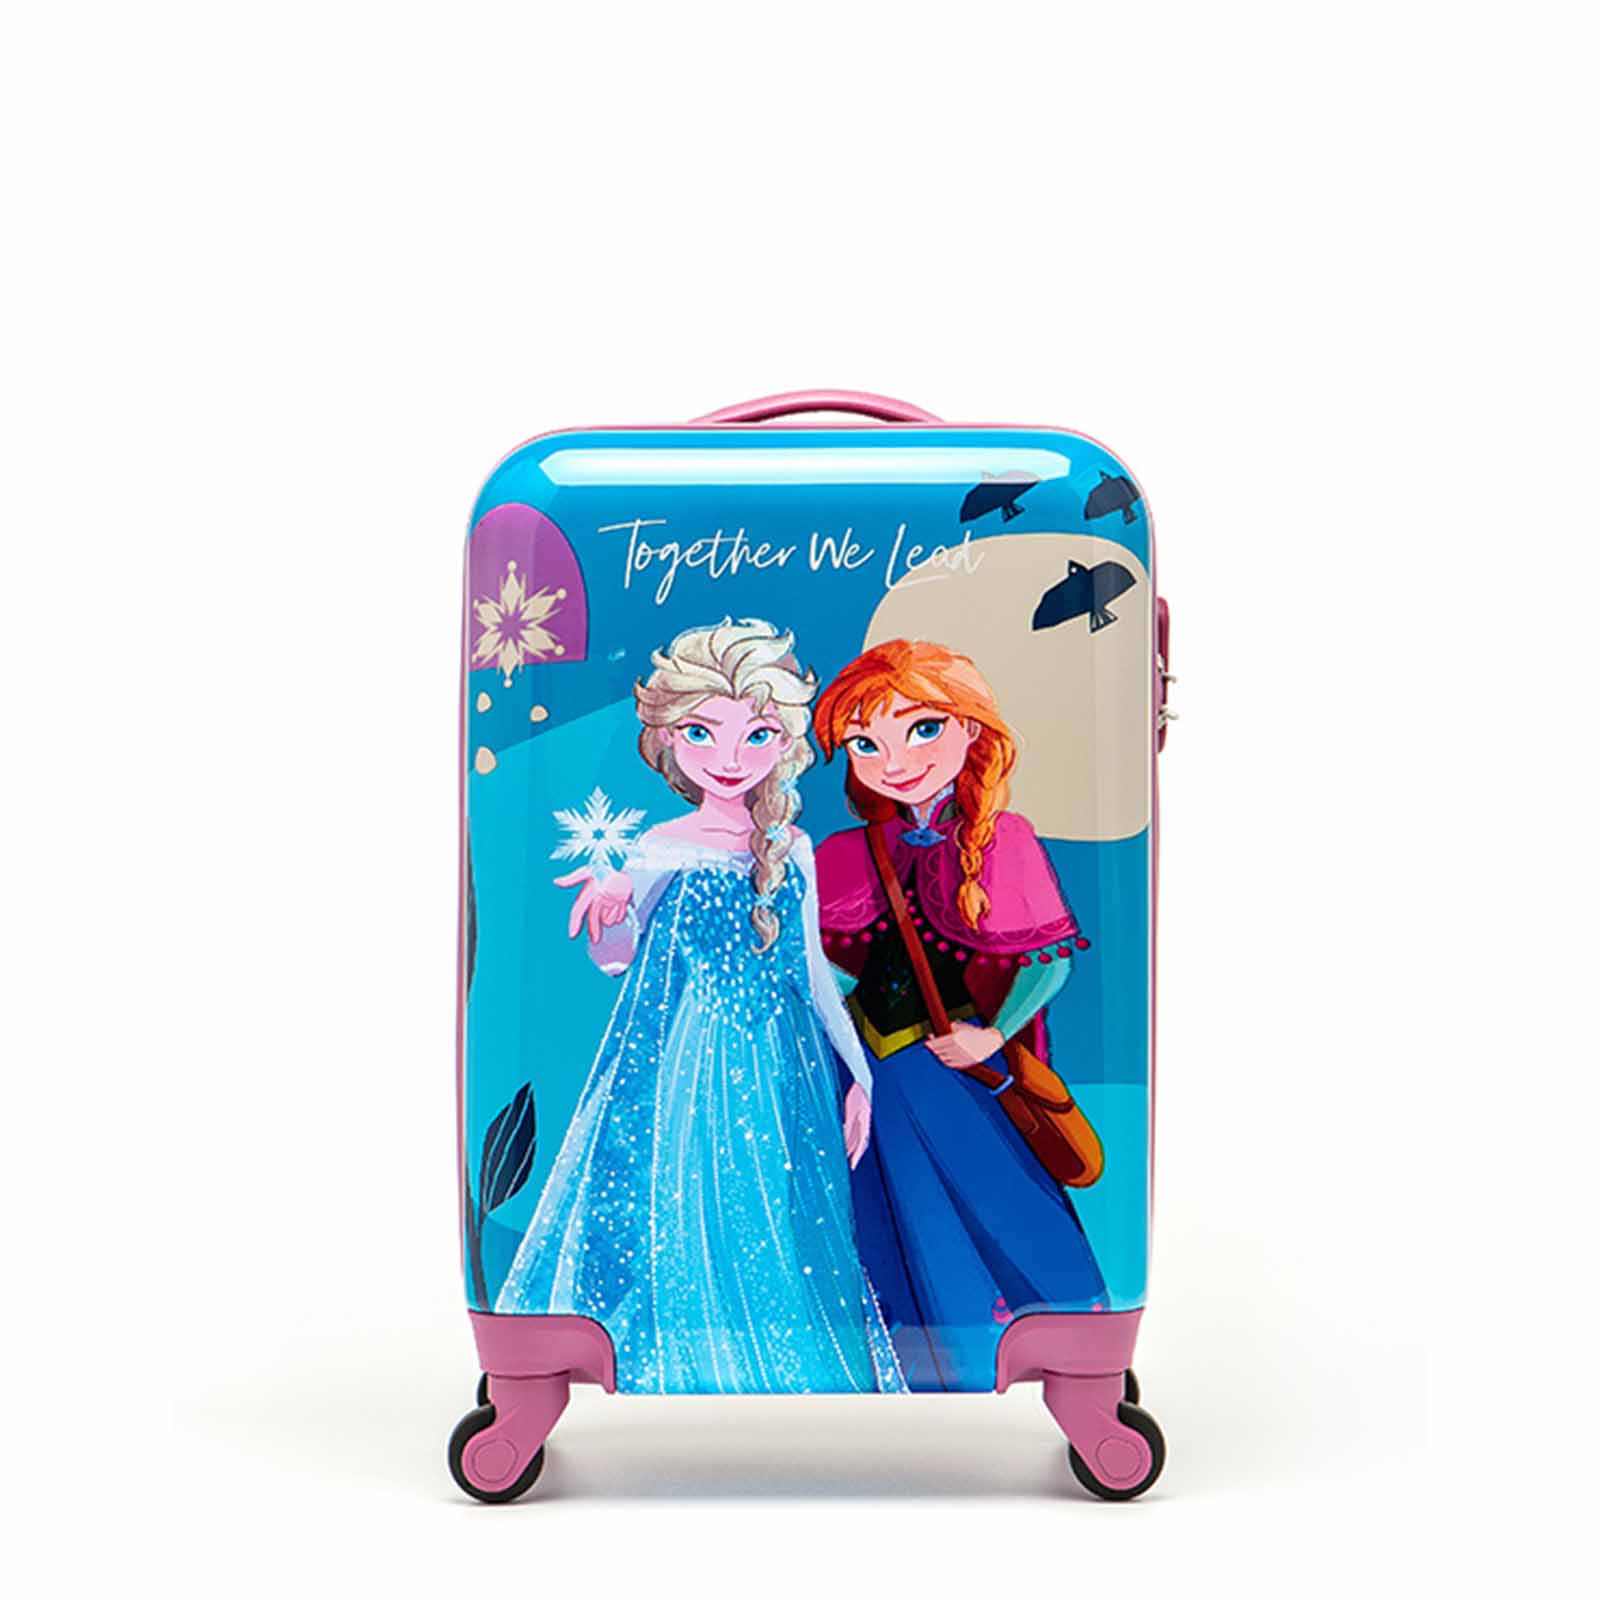 Disney-Frozen-20inch-Carry-On-Suitcase-Front-Front-Logo